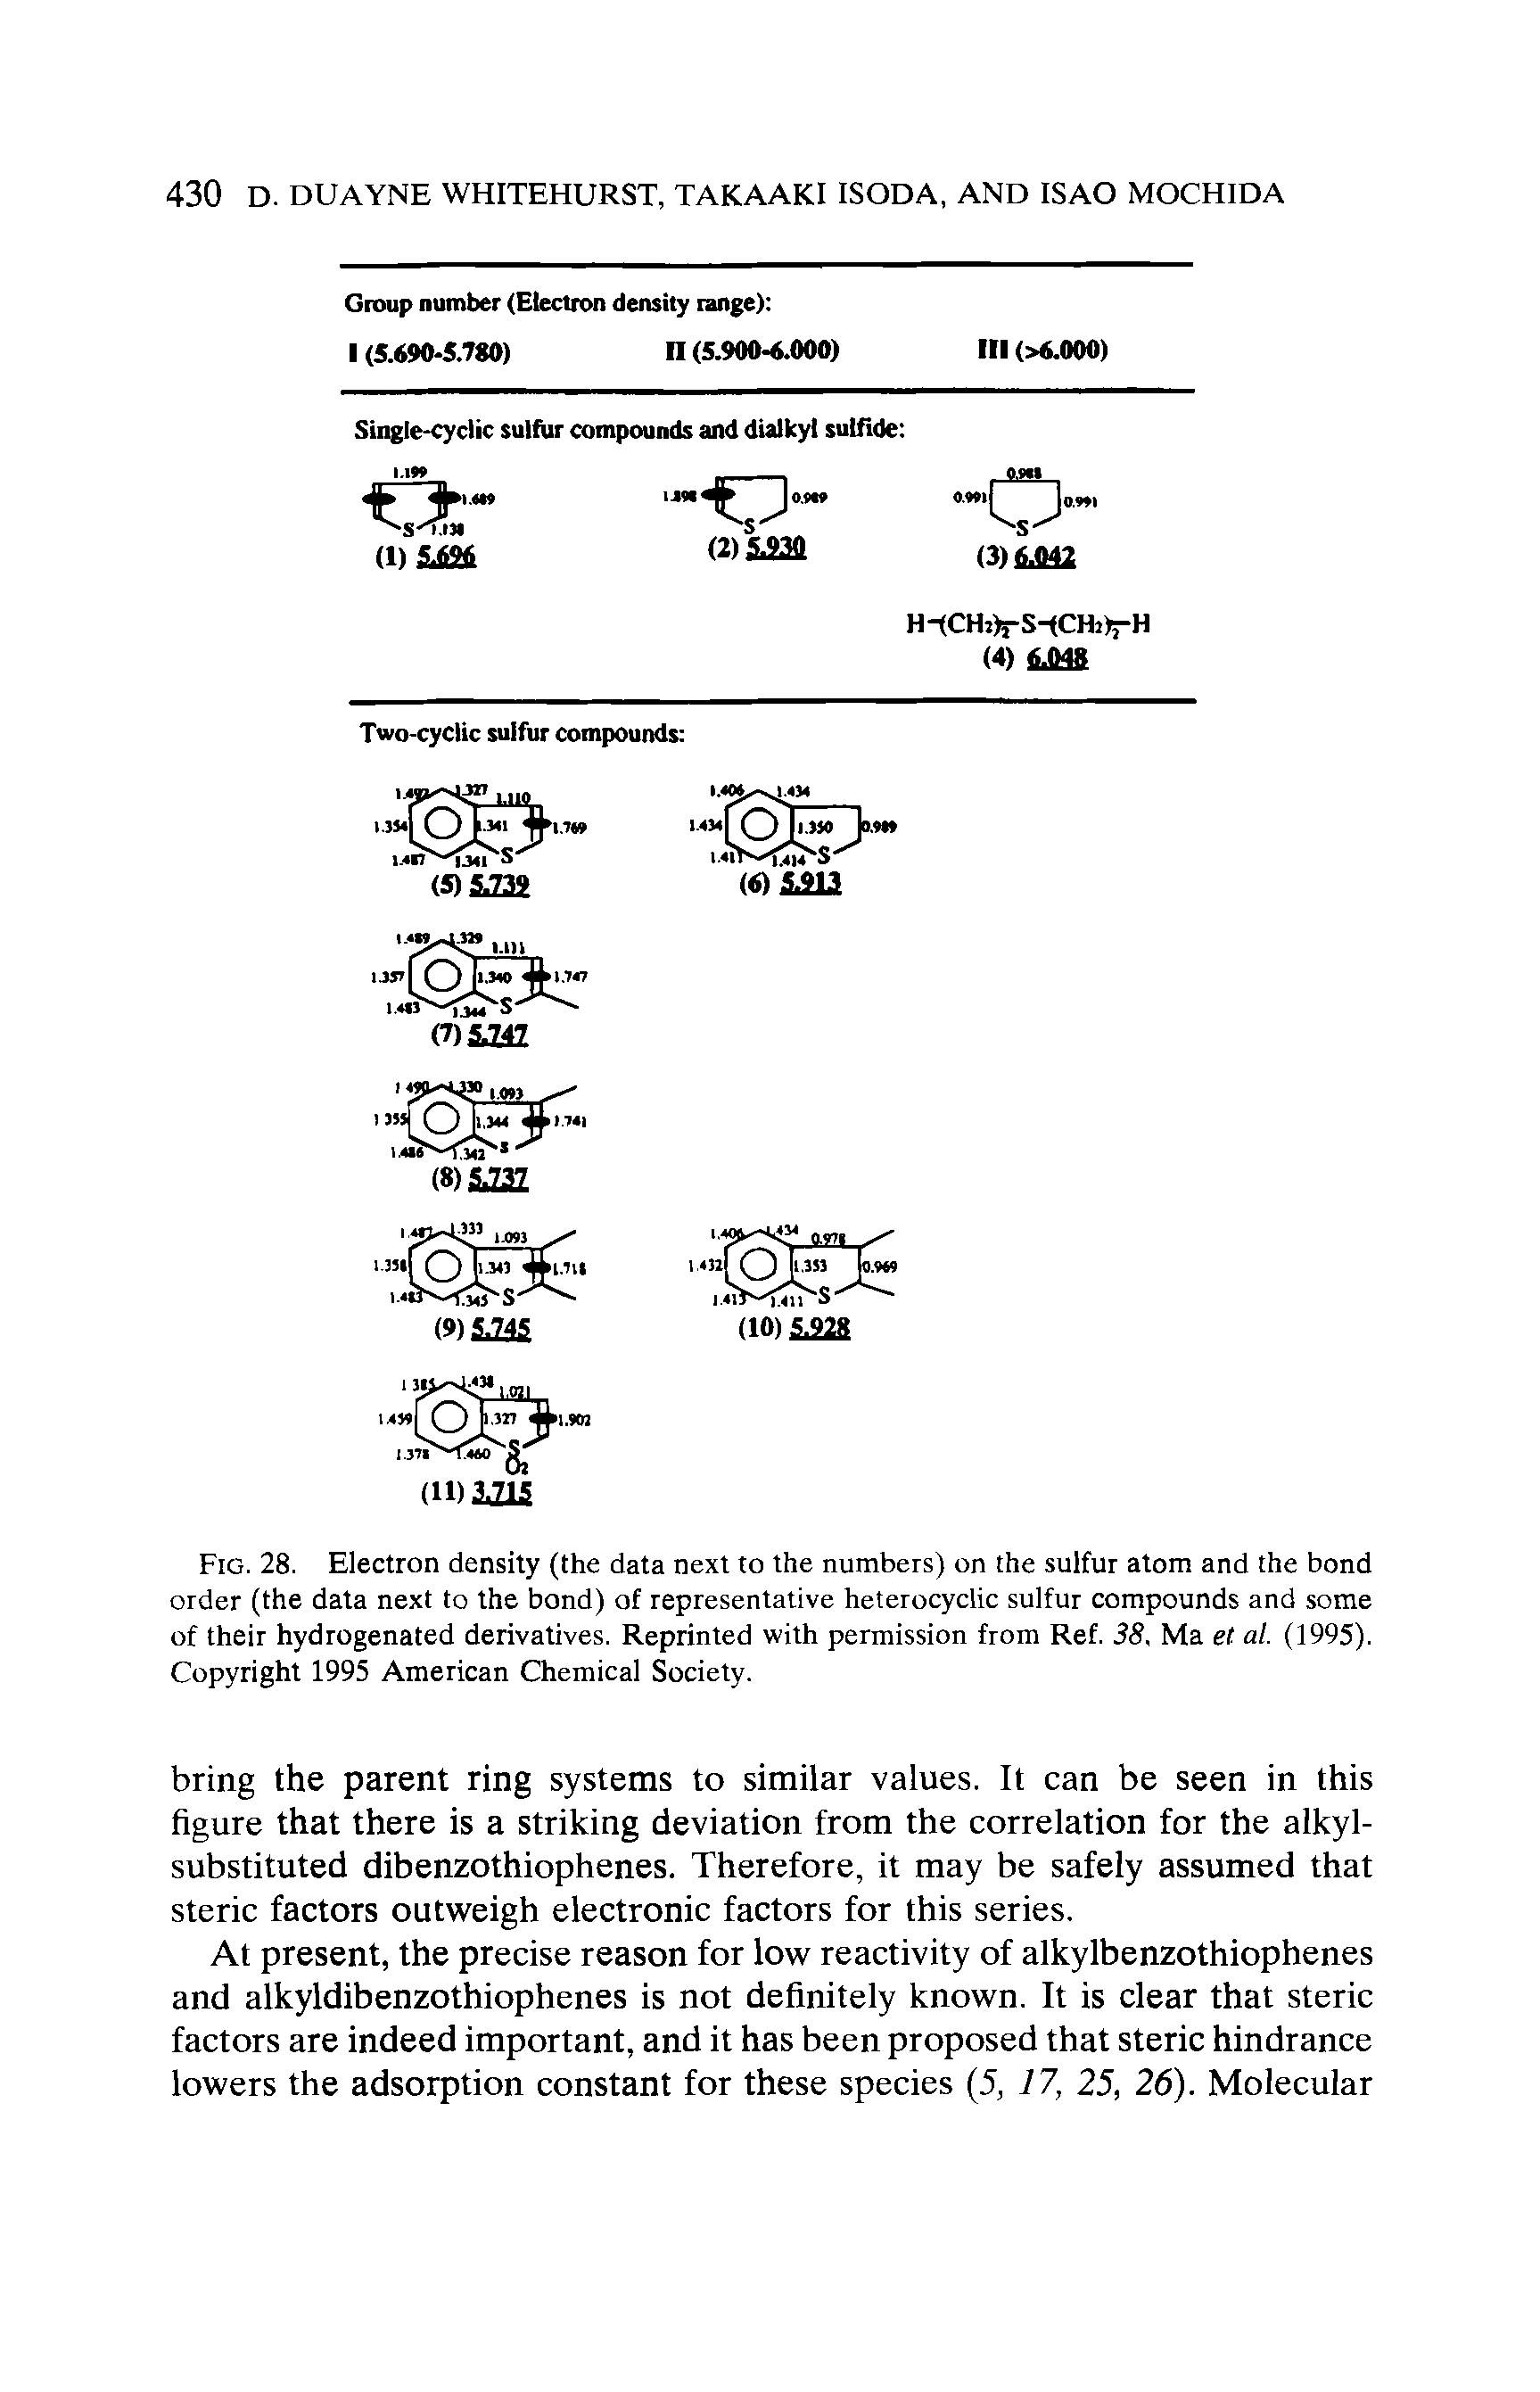 Fig. 28. Electron density (the data next to the numbers) on the sulfur atom and the bond order (the data next to the bond) of representative heterocyclic sulfur compounds and some of their hydrogenated derivatives. Reprinted with permission from Ref. 38, Ma et al. (1995). Copyright 1995 American Chemical Society.